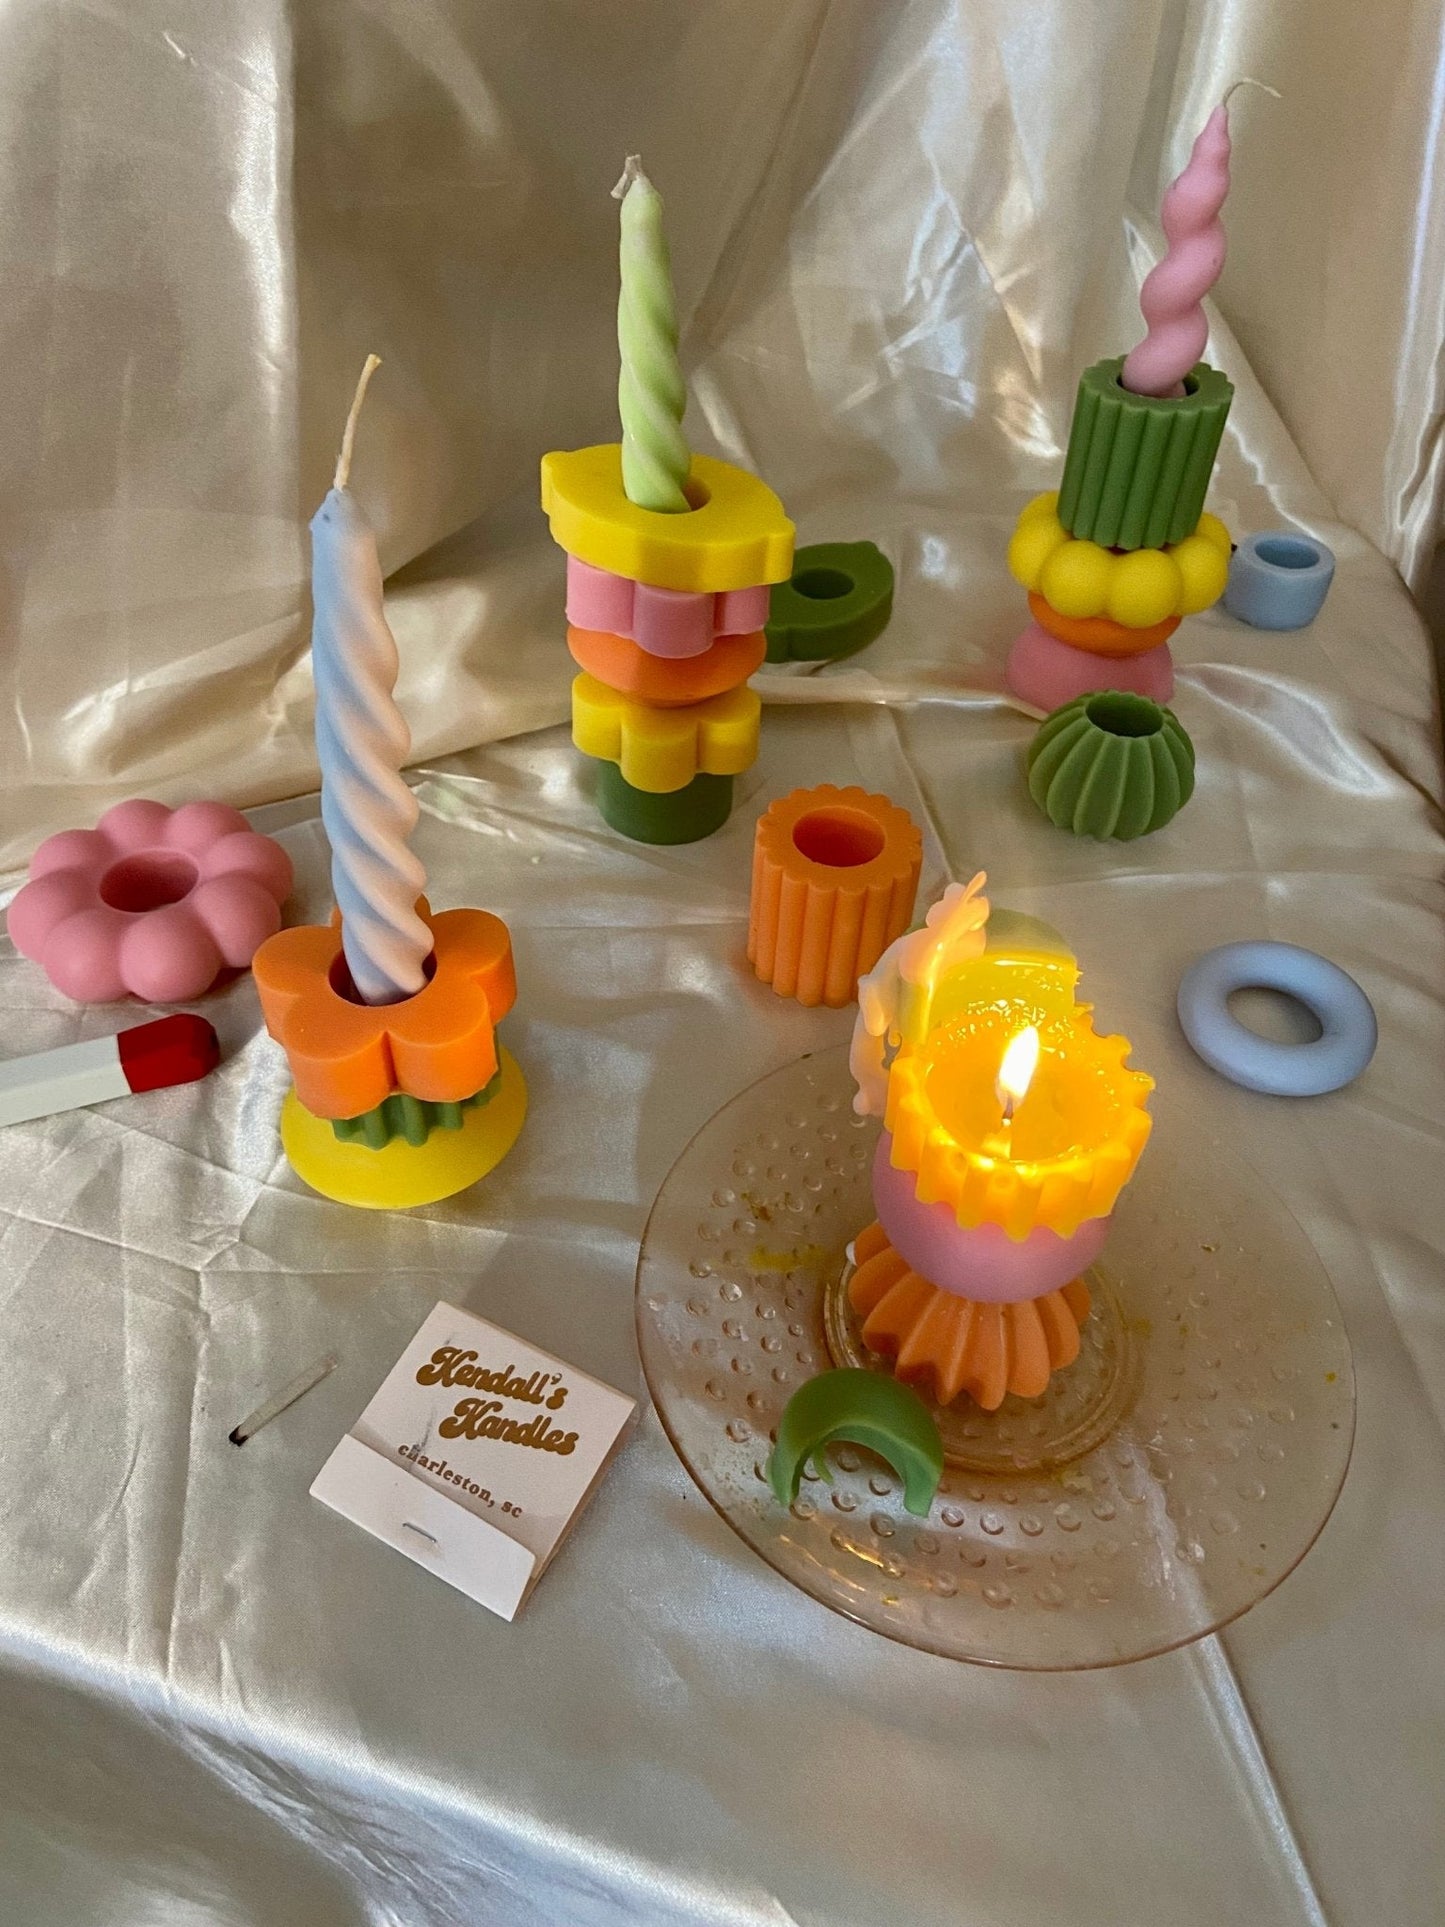 Taper candle stacker - Kendall's Kandles